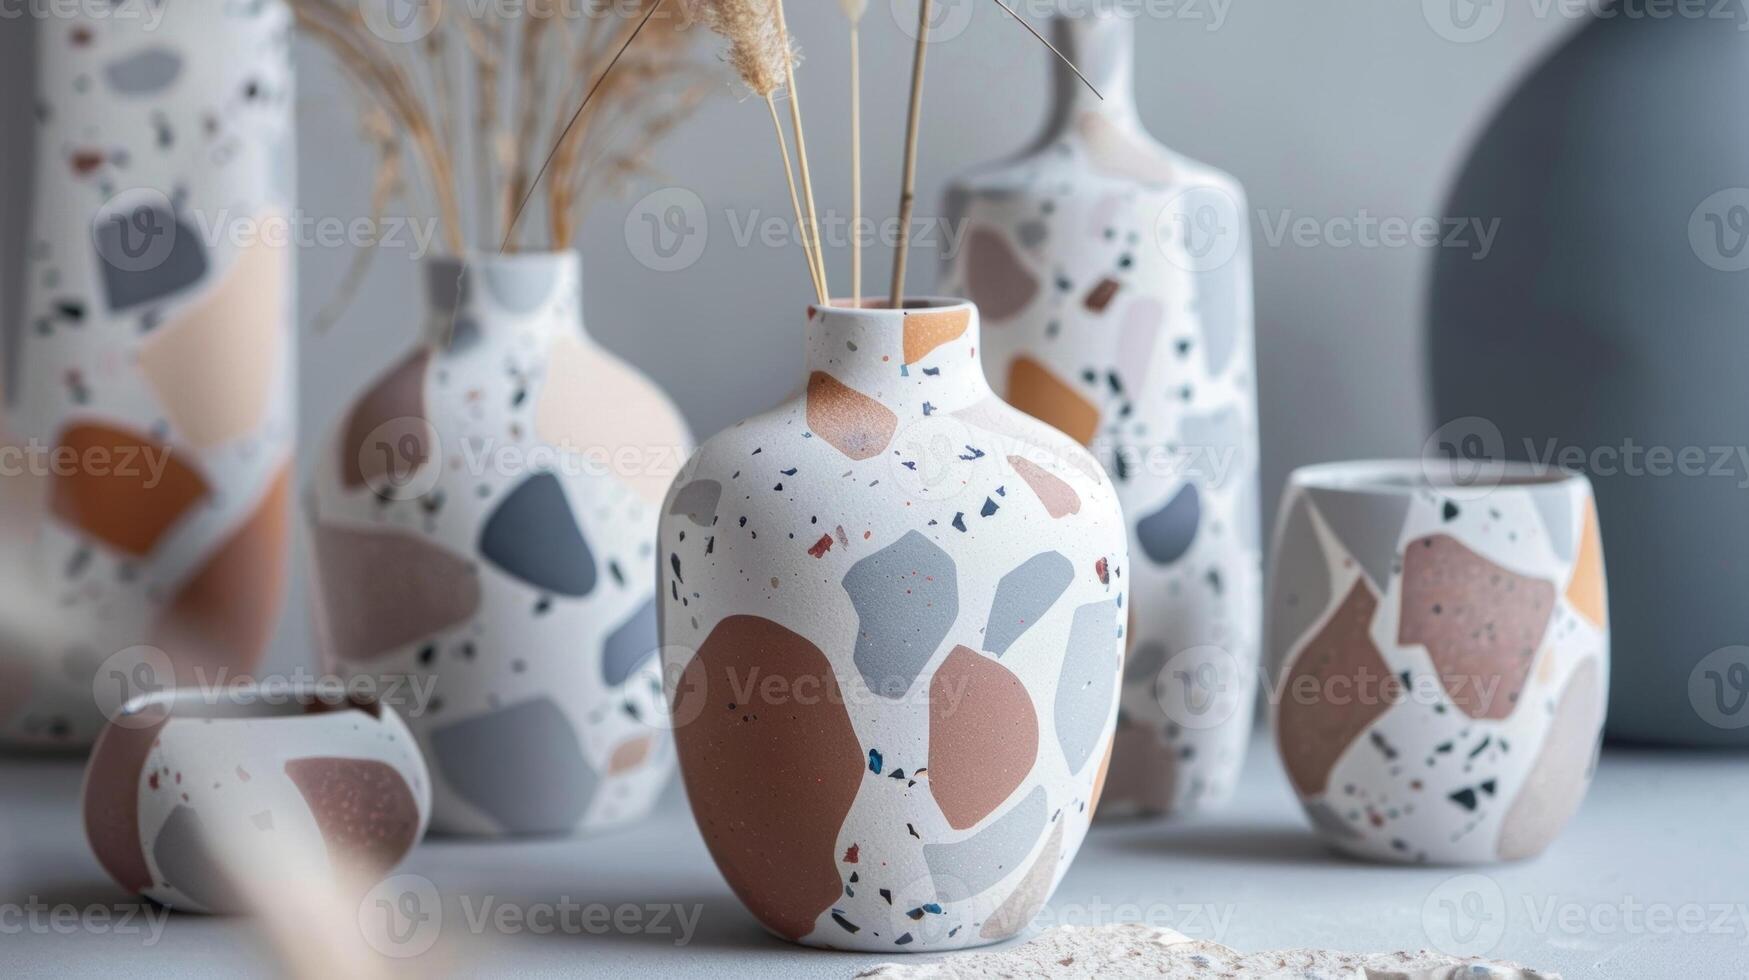 A terracotta vase with a modern twist featuring a terrazzo pattern in shades of grey white and blush pink. photo